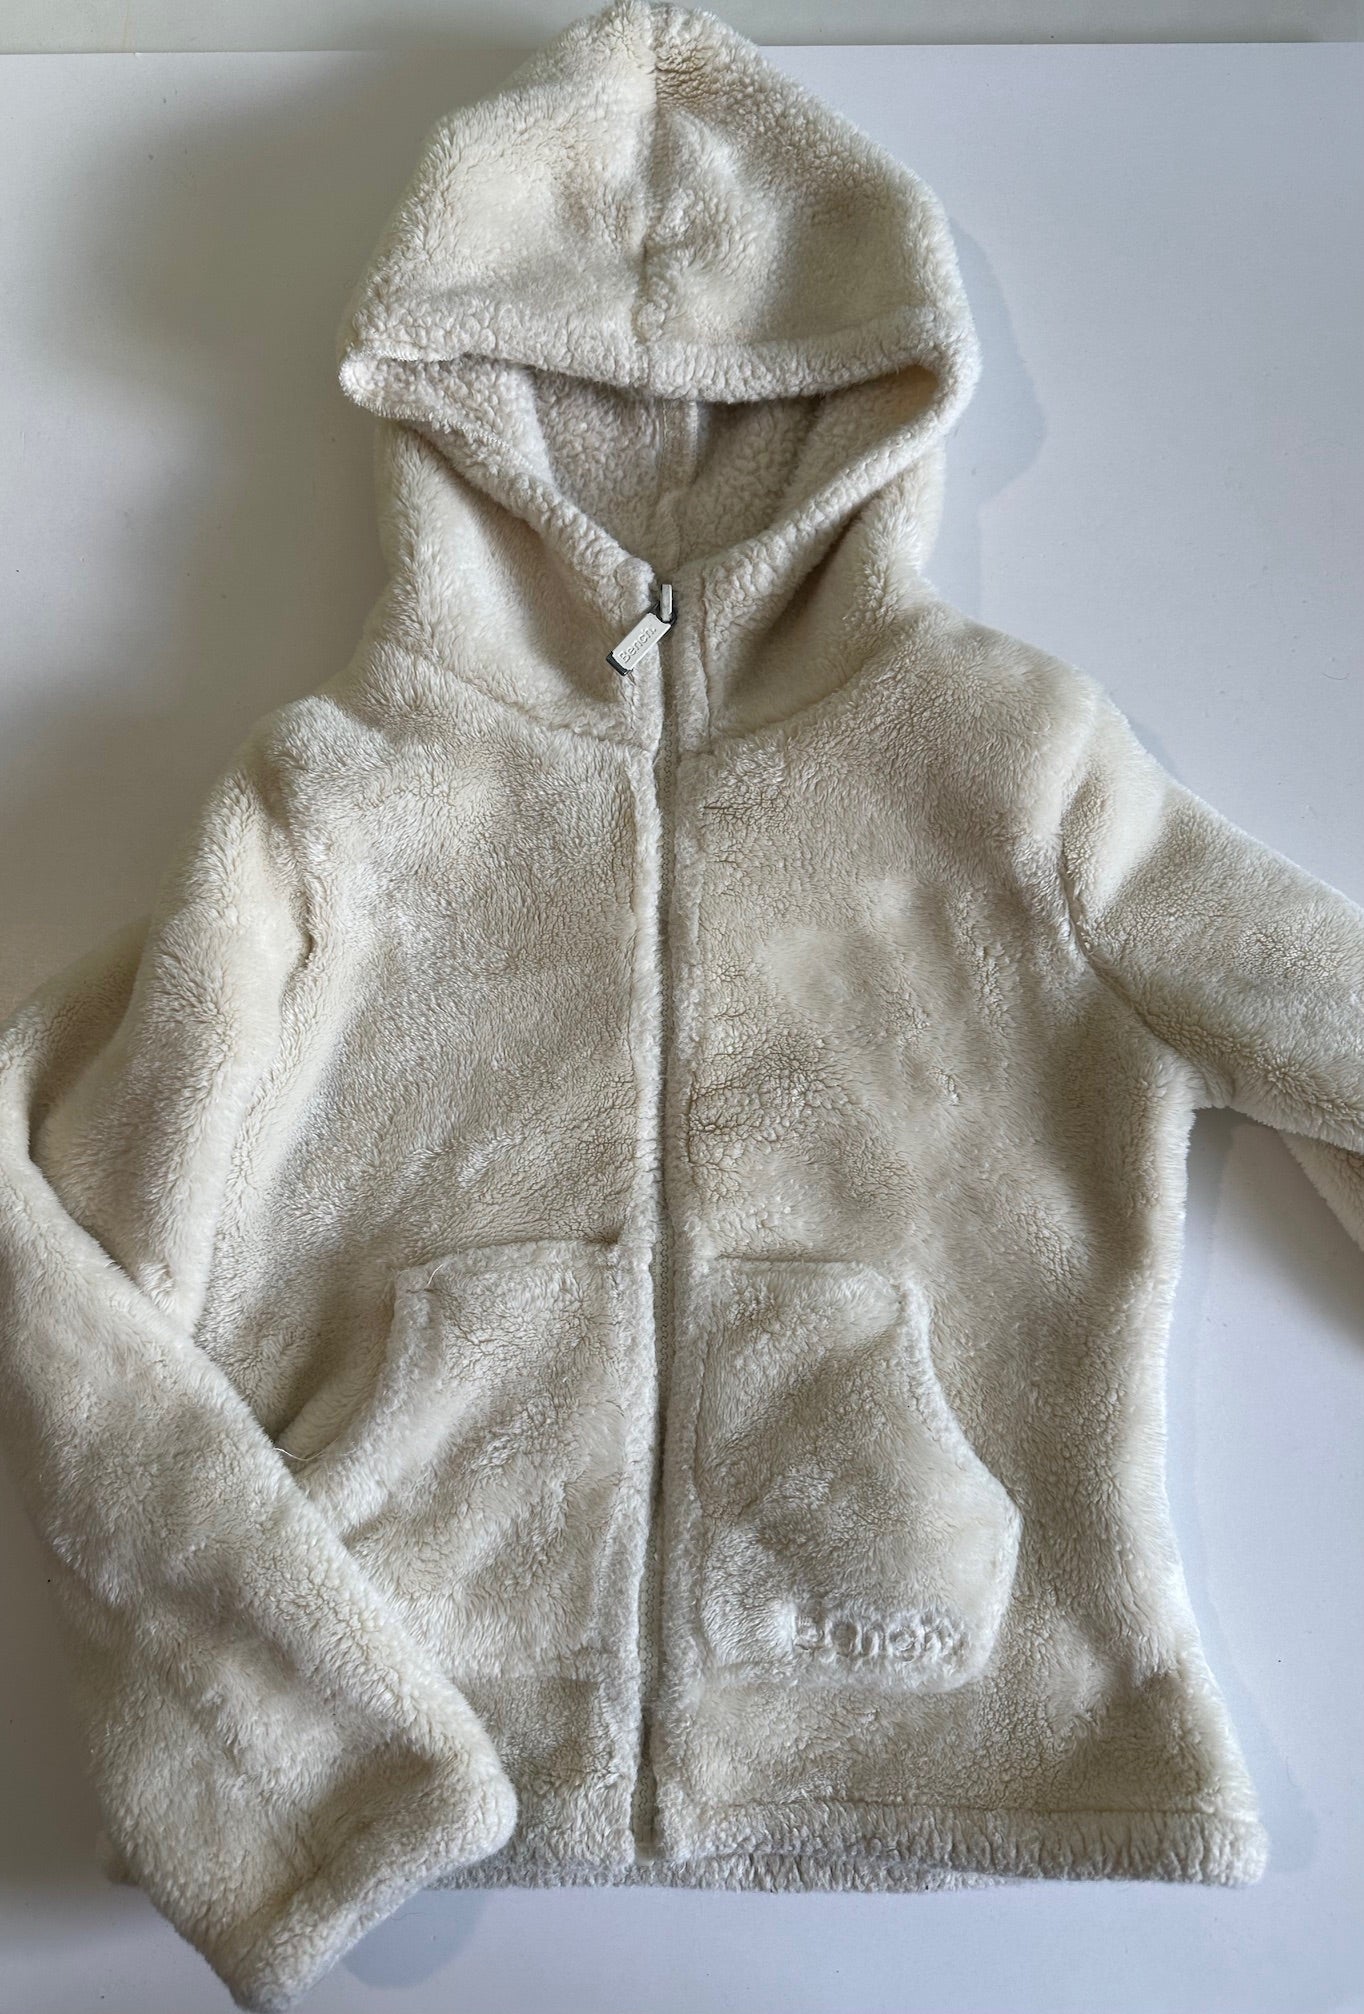 Bench, Soft Ivory Zip-Up Hoodie - Size 5/6